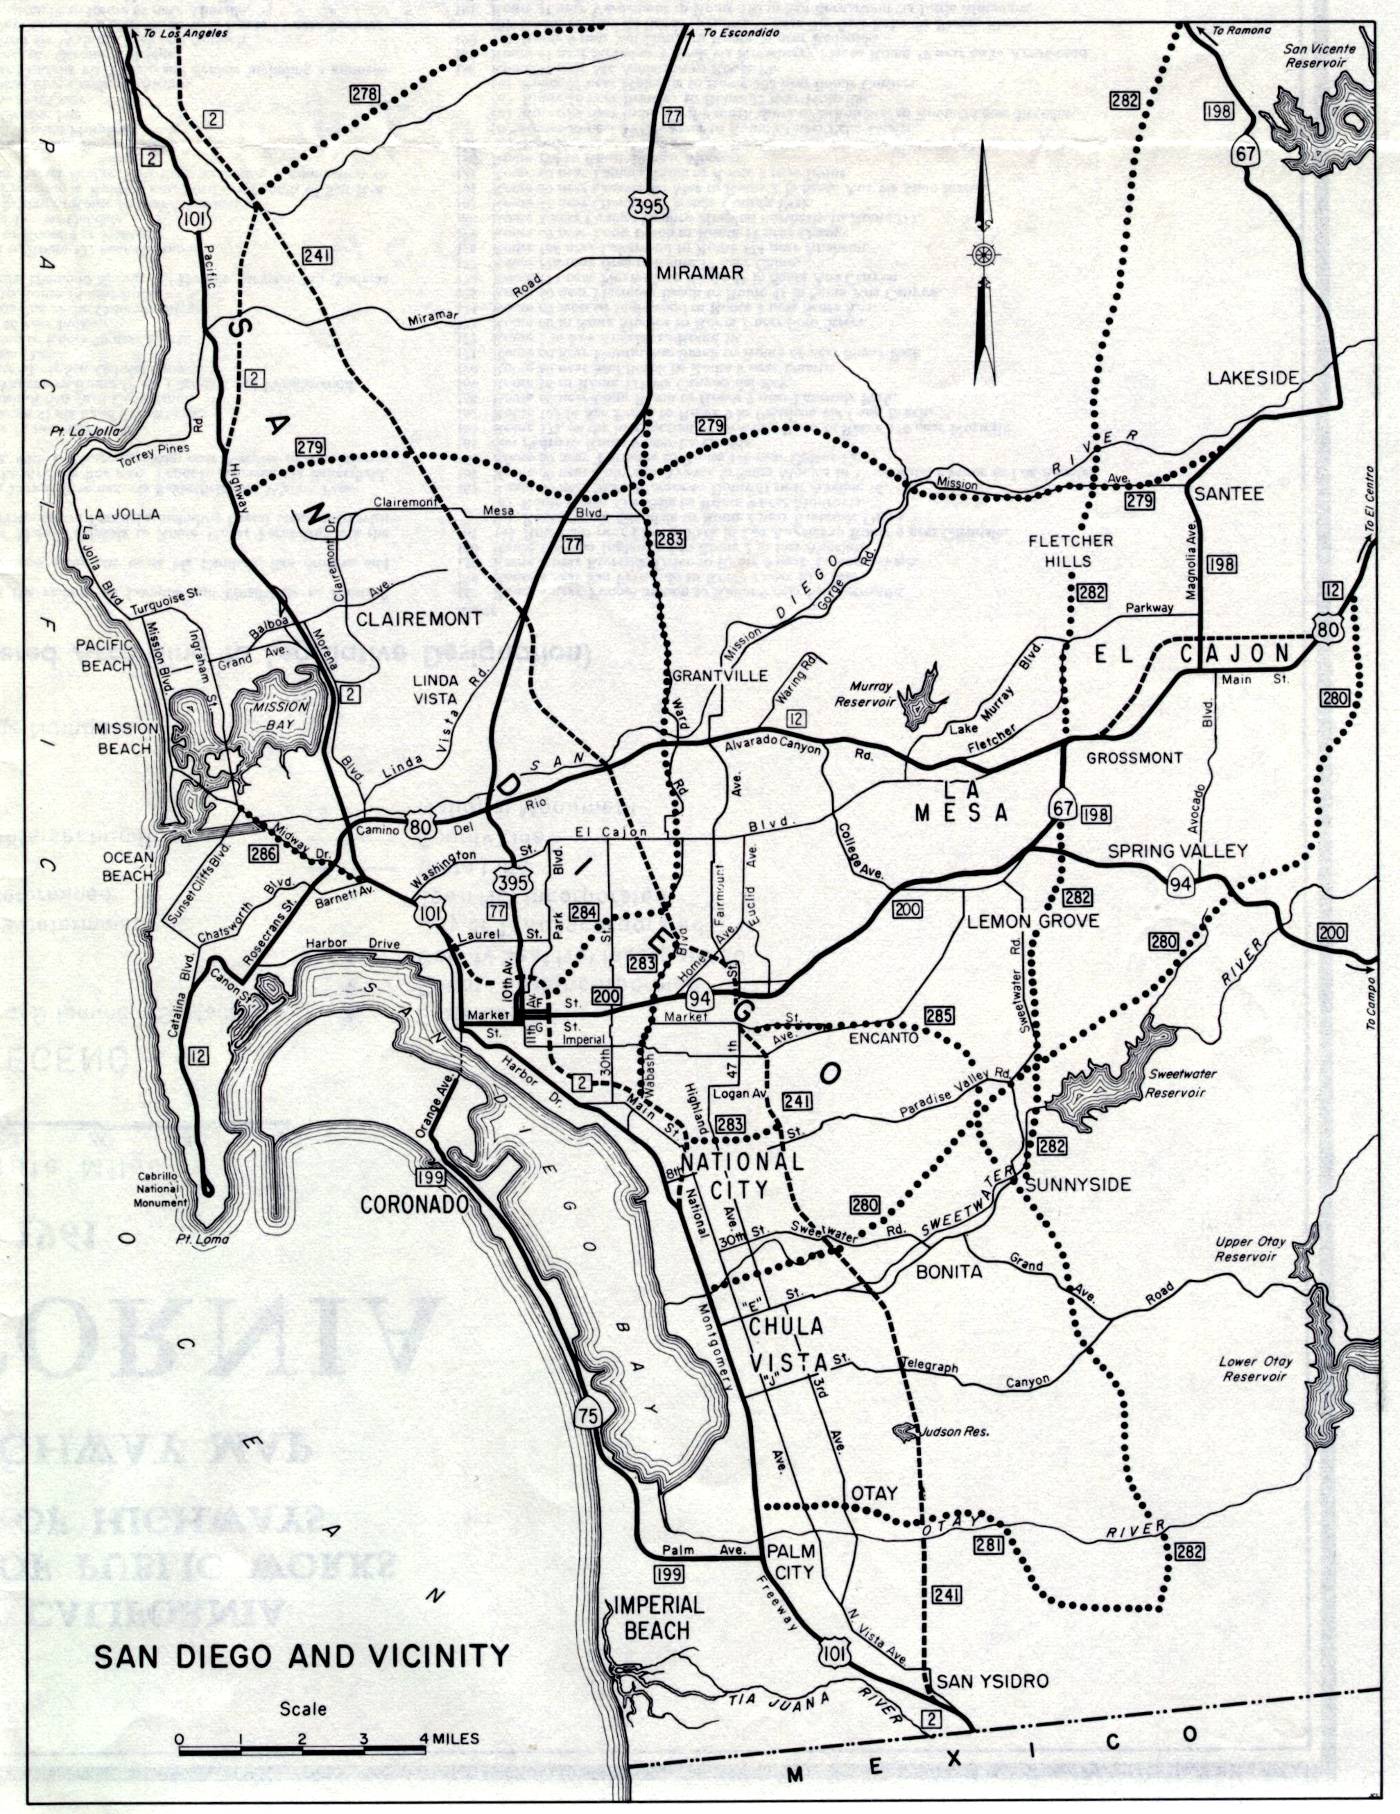 Detail map for San Diego on the 1961 California official highway map